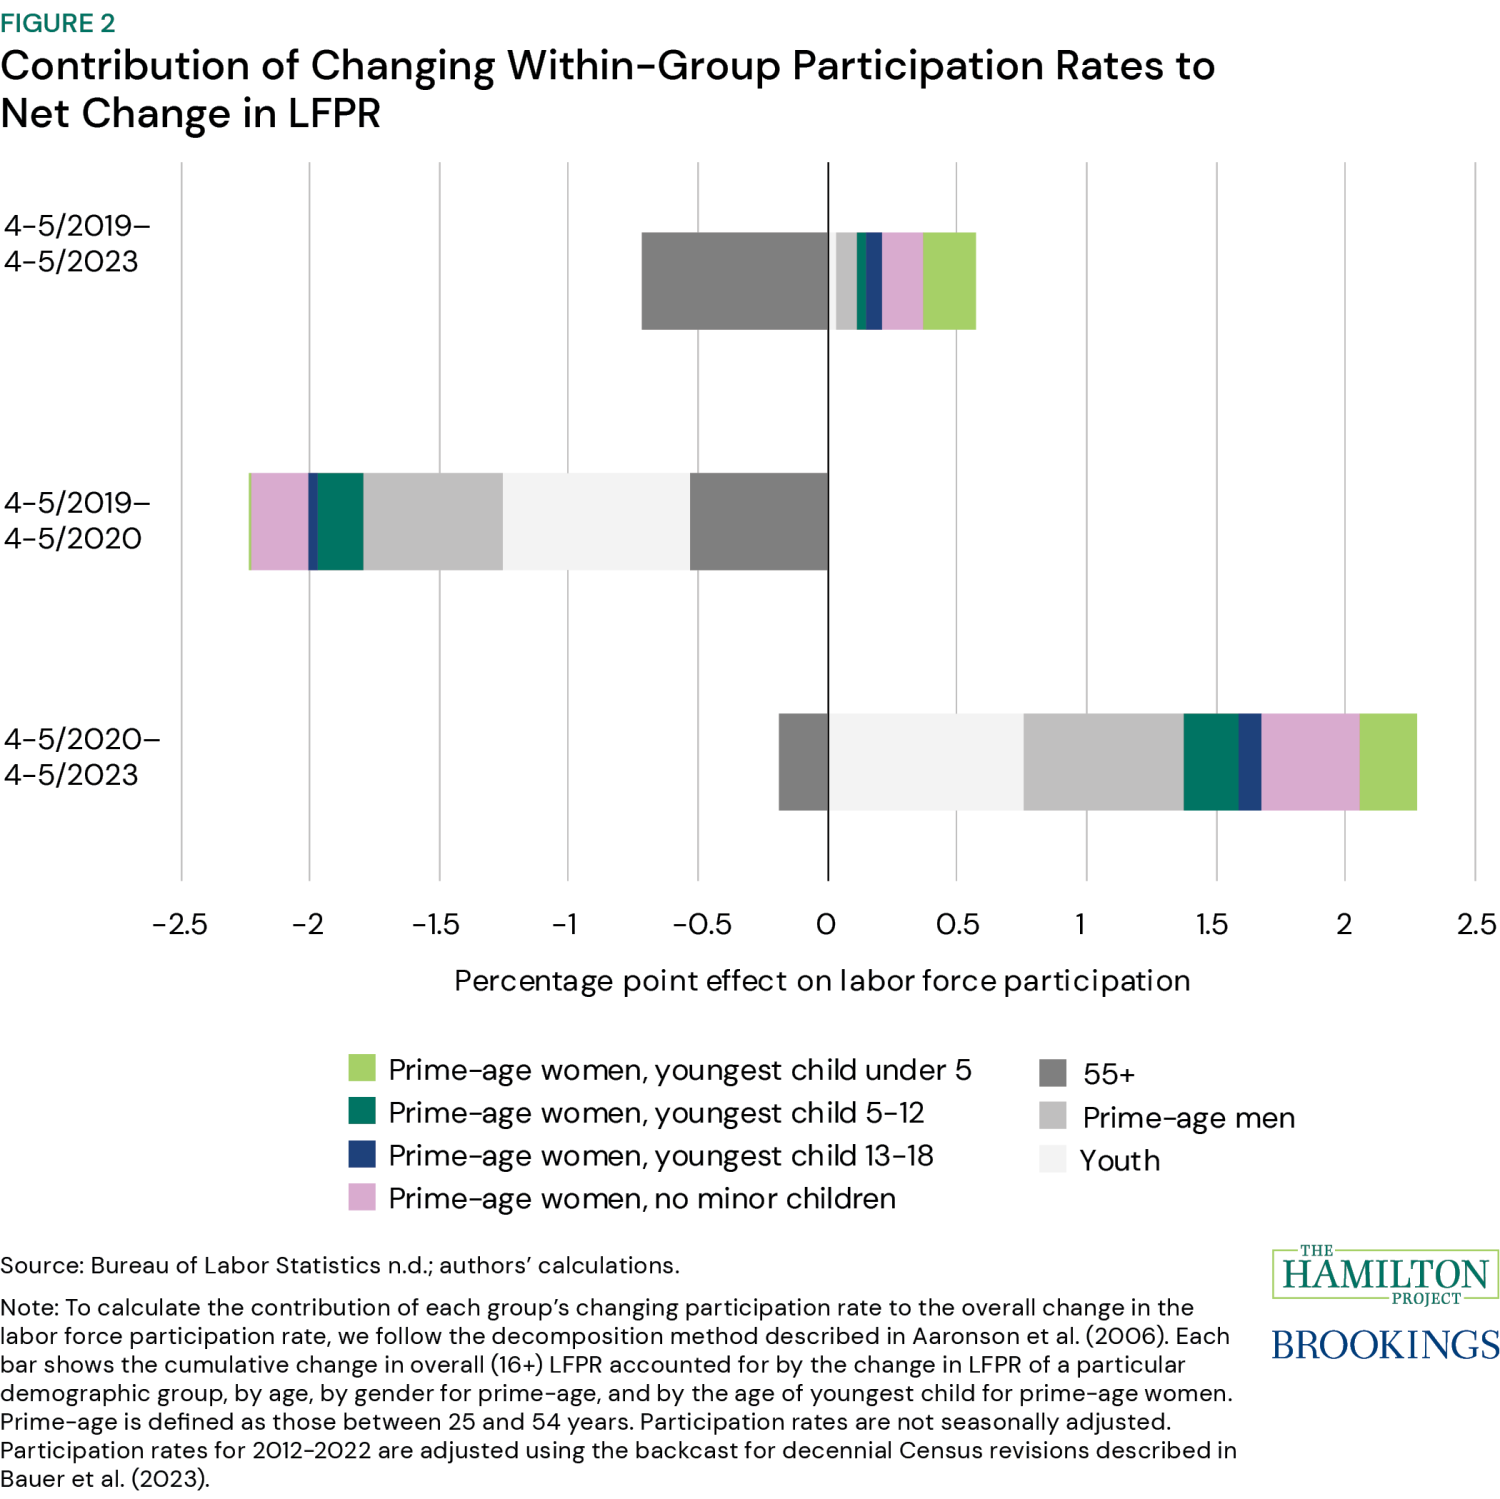 Figure 2. Contributions of Changing Group Participation Rates on Overall Labor Force Participation Rate 2019 to 2023, by Gender and Age (of Youngest Child)